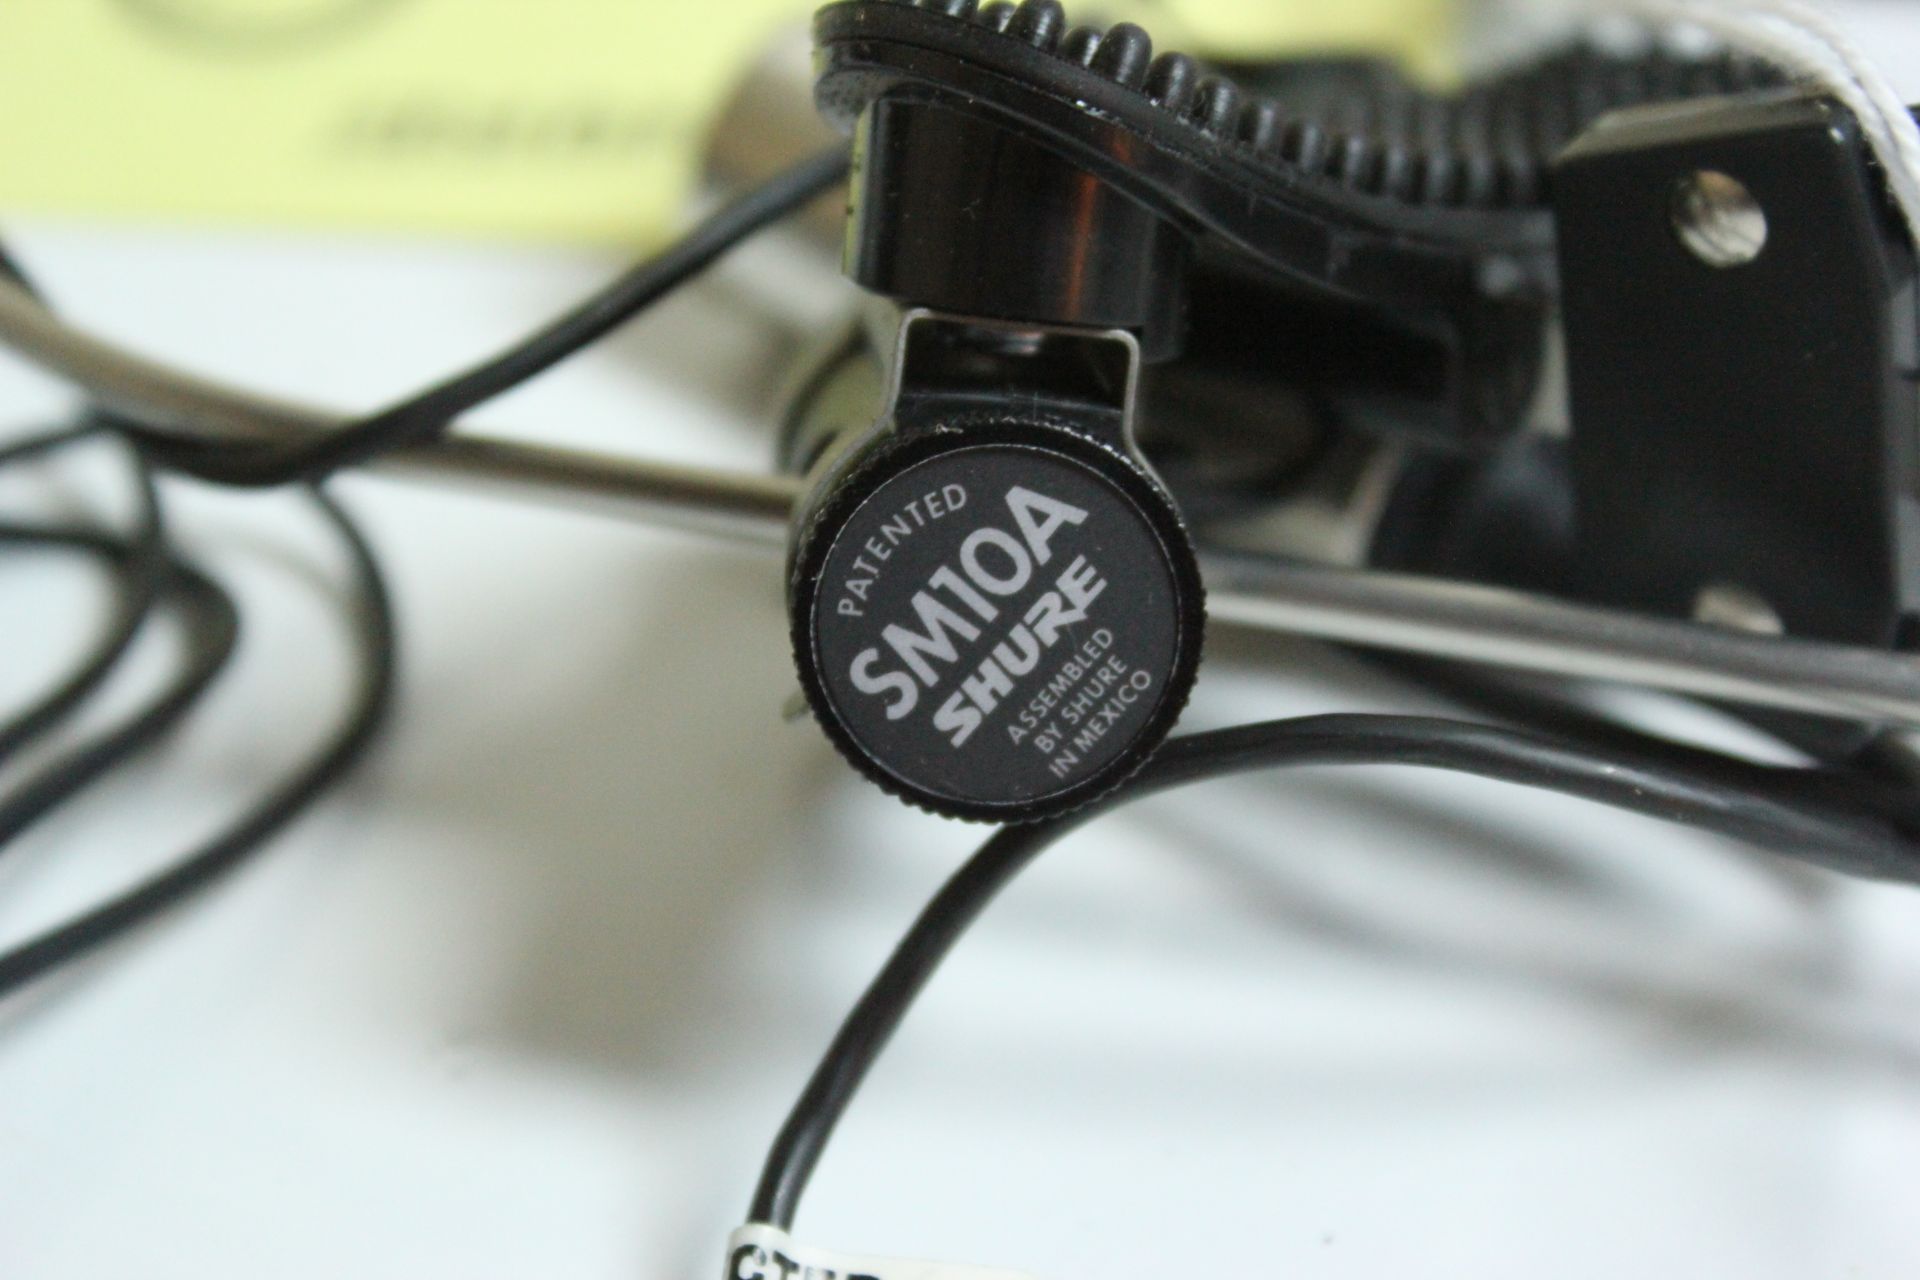 NEW SHURE PROFESSIONAL HEAD WORN MICROPHONE - Image 4 of 5